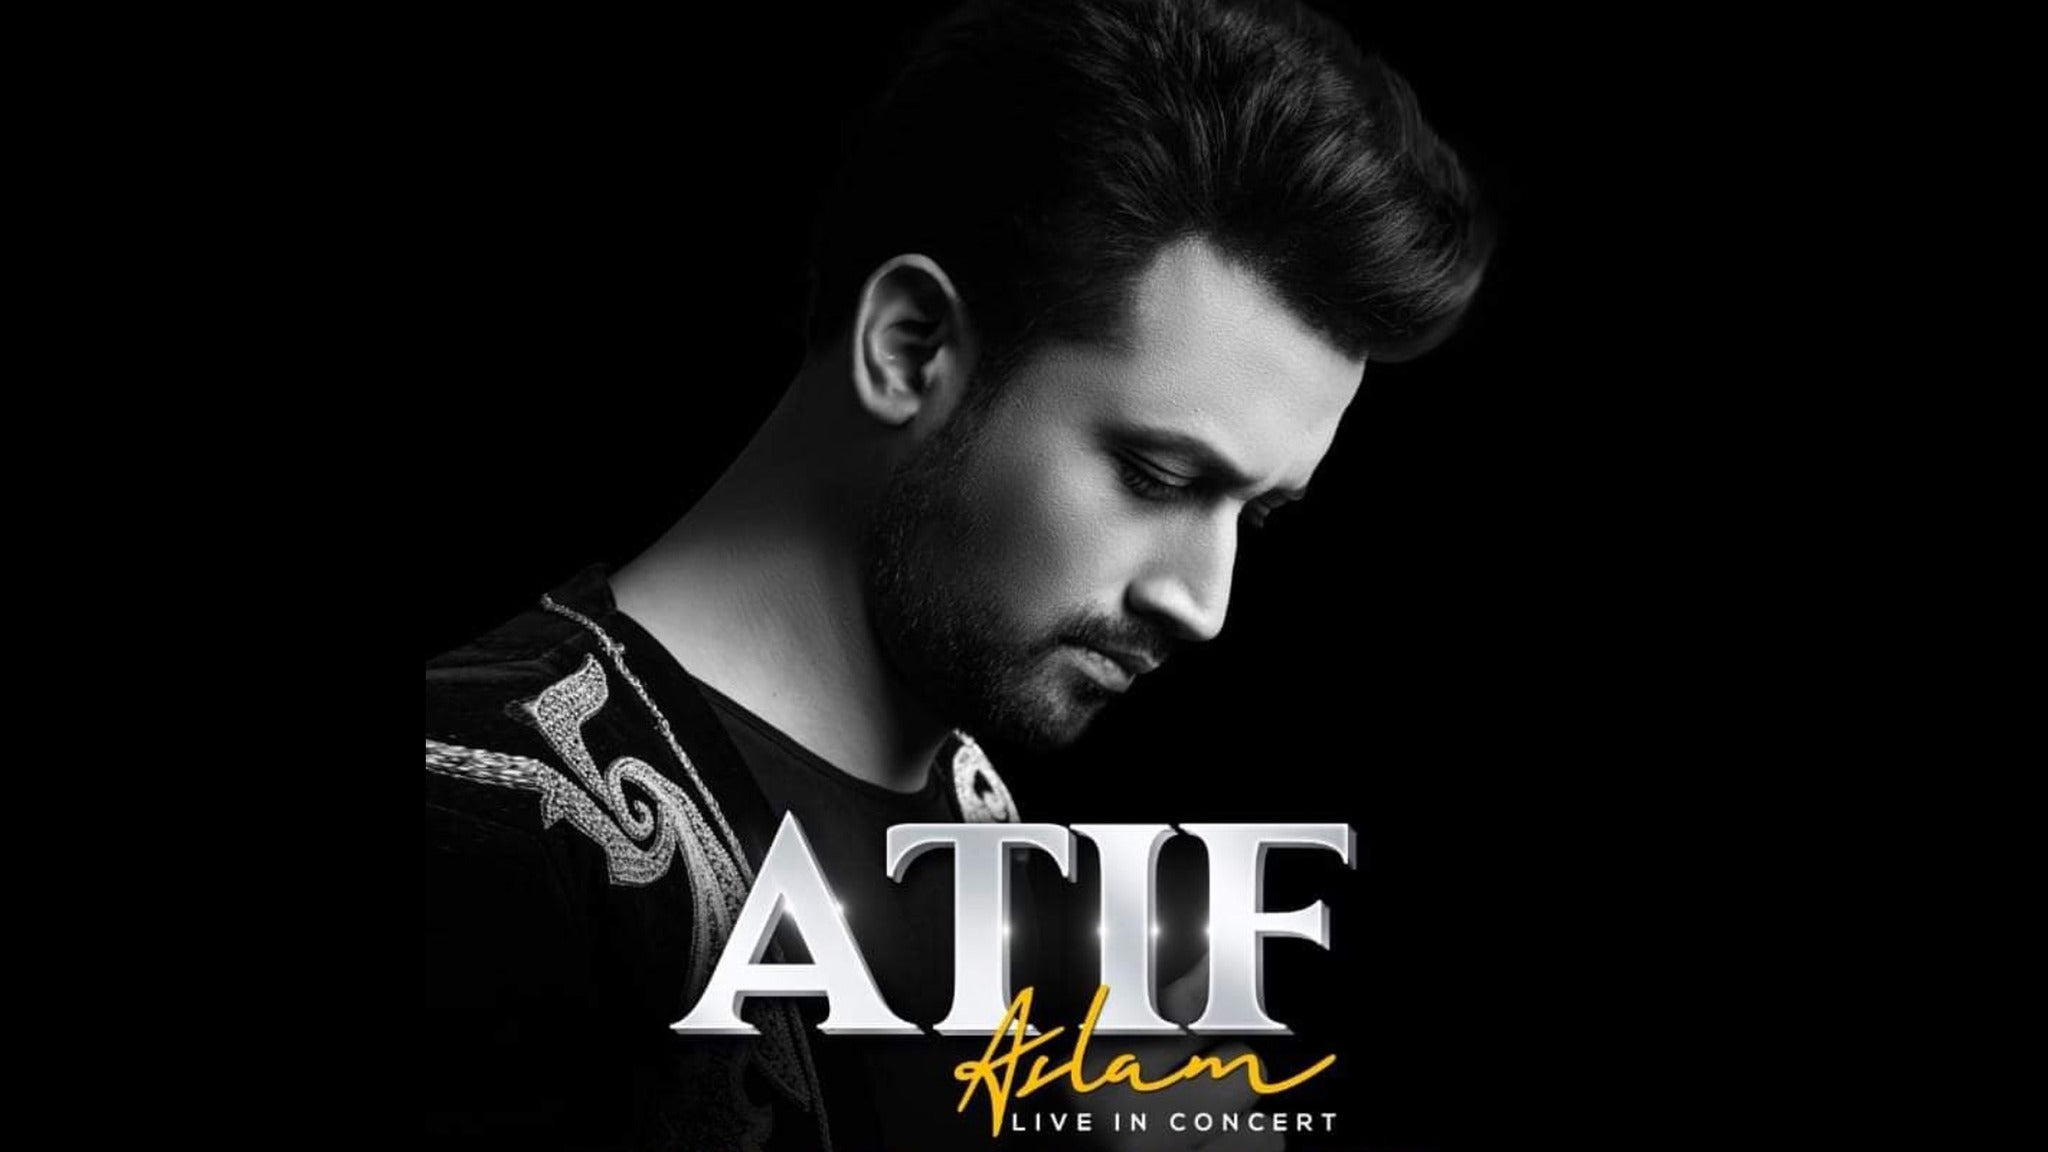 Atif Aslam Live In Concert presale code for early tickets in Irving